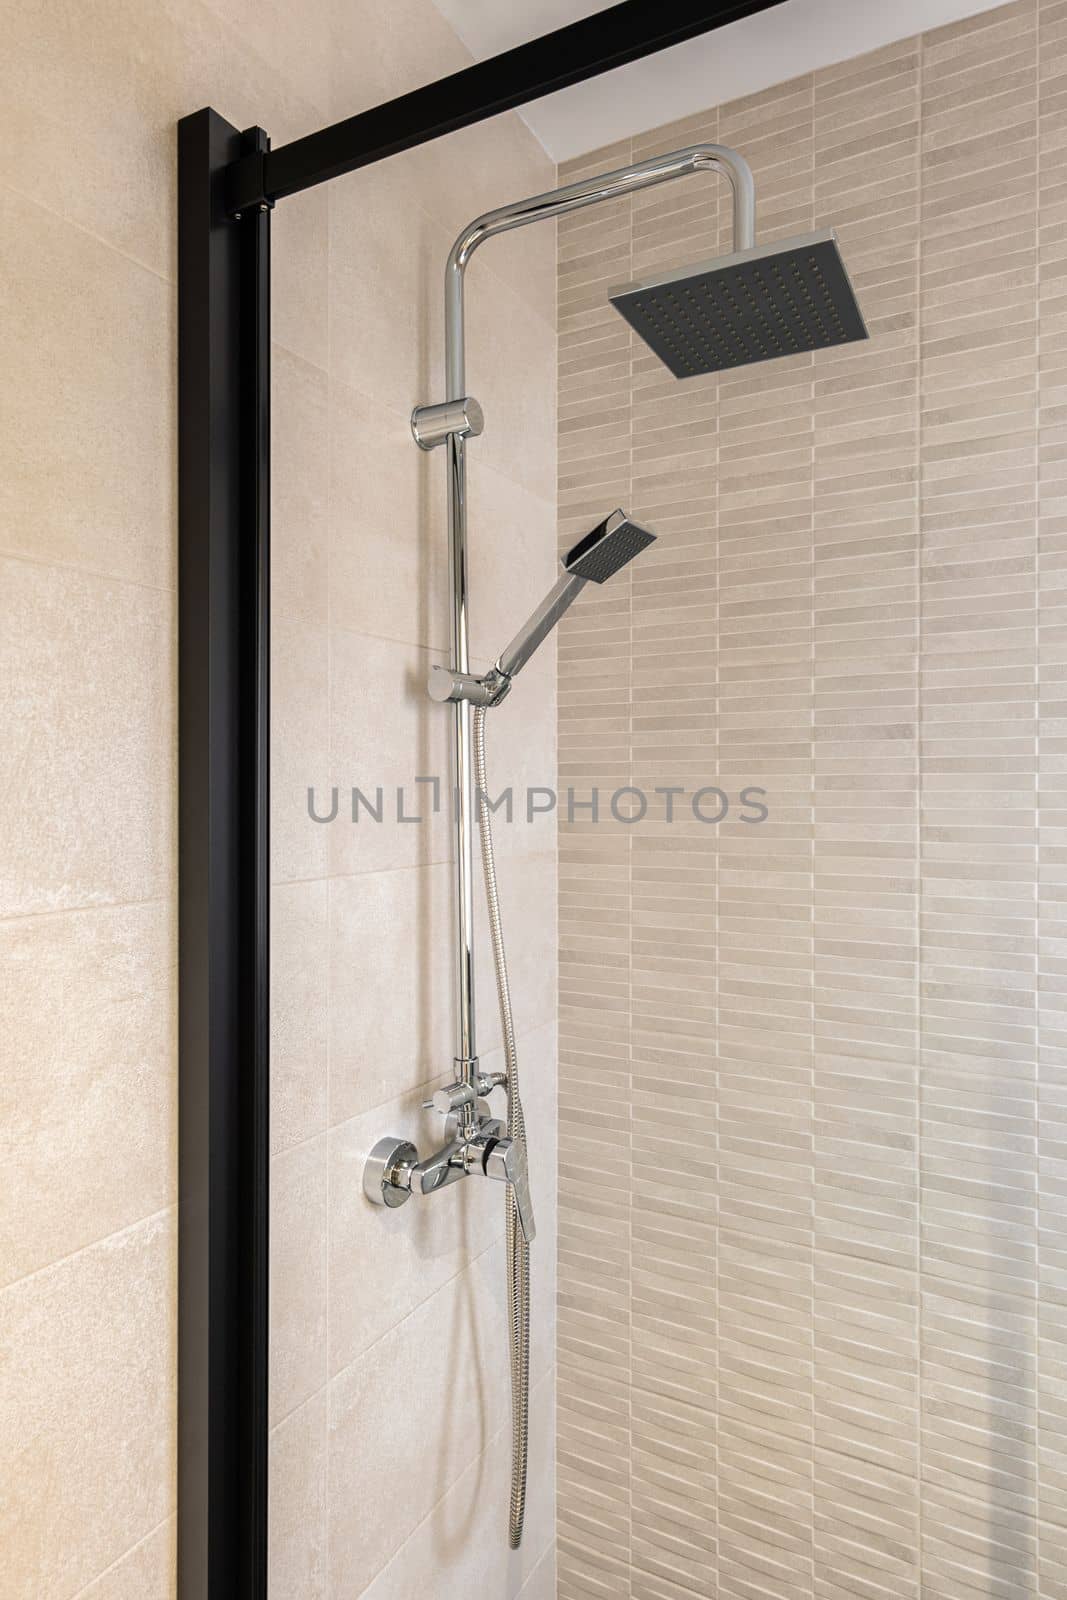 Modern shower zone with black rain head and hand held shower. Beige tiles in the bathroom